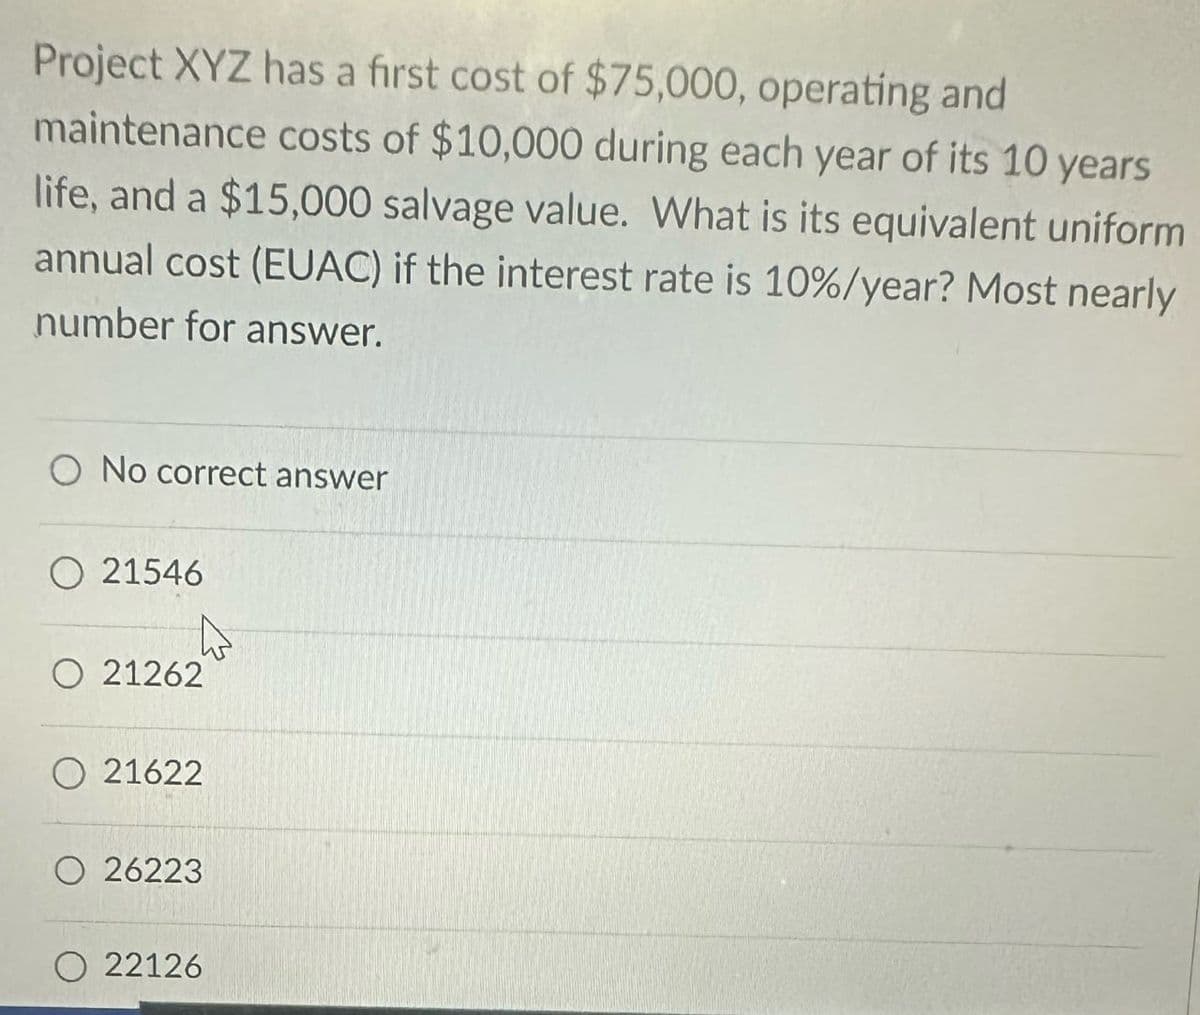 Project XYZ has a first cost of $75,000, operating and
maintenance costs of $10,000 during each year of its 10 years
life, and a $15,000 salvage value. What is its equivalent uniform
annual cost (EUAC) if the interest rate is 10%/year? Most nearly
number for answer.
O No correct answer
21546
O 21262
21622
26223
22126